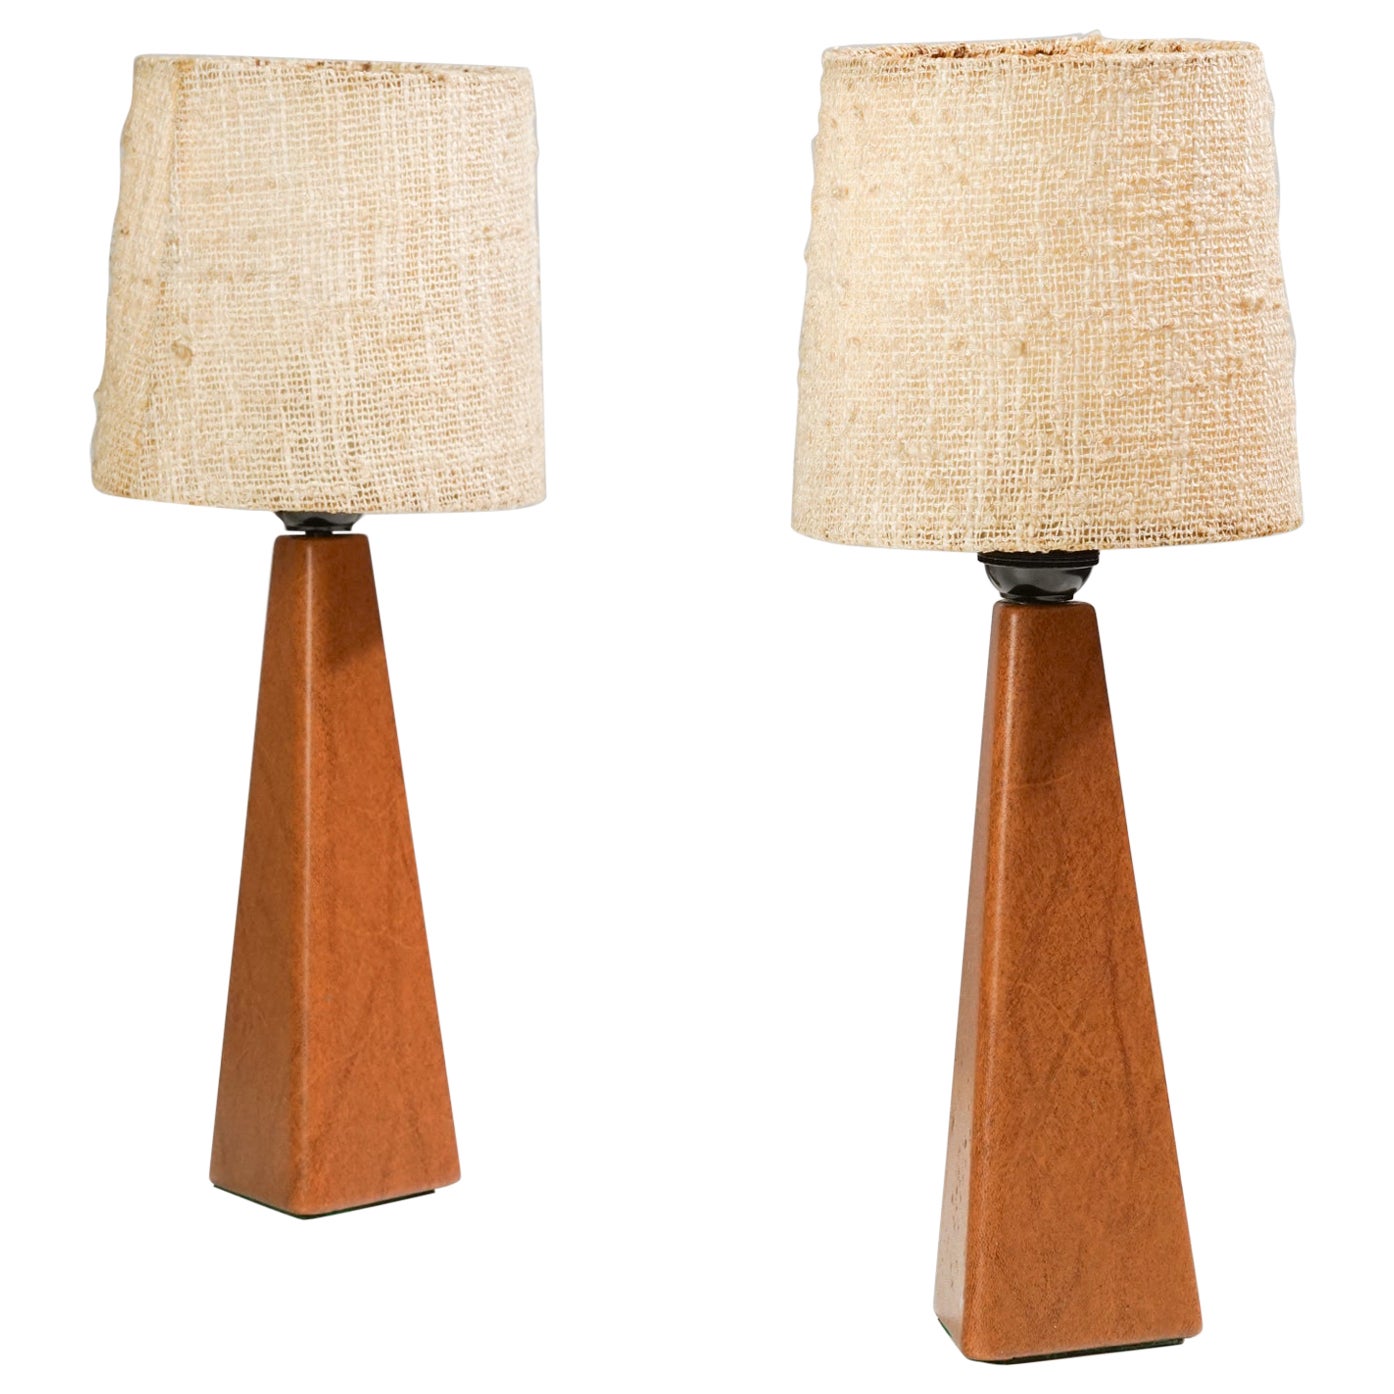 Set of Two Leather Table Lamps by Lisa Johansson-Pape for Orno, Mid-20th Century For Sale